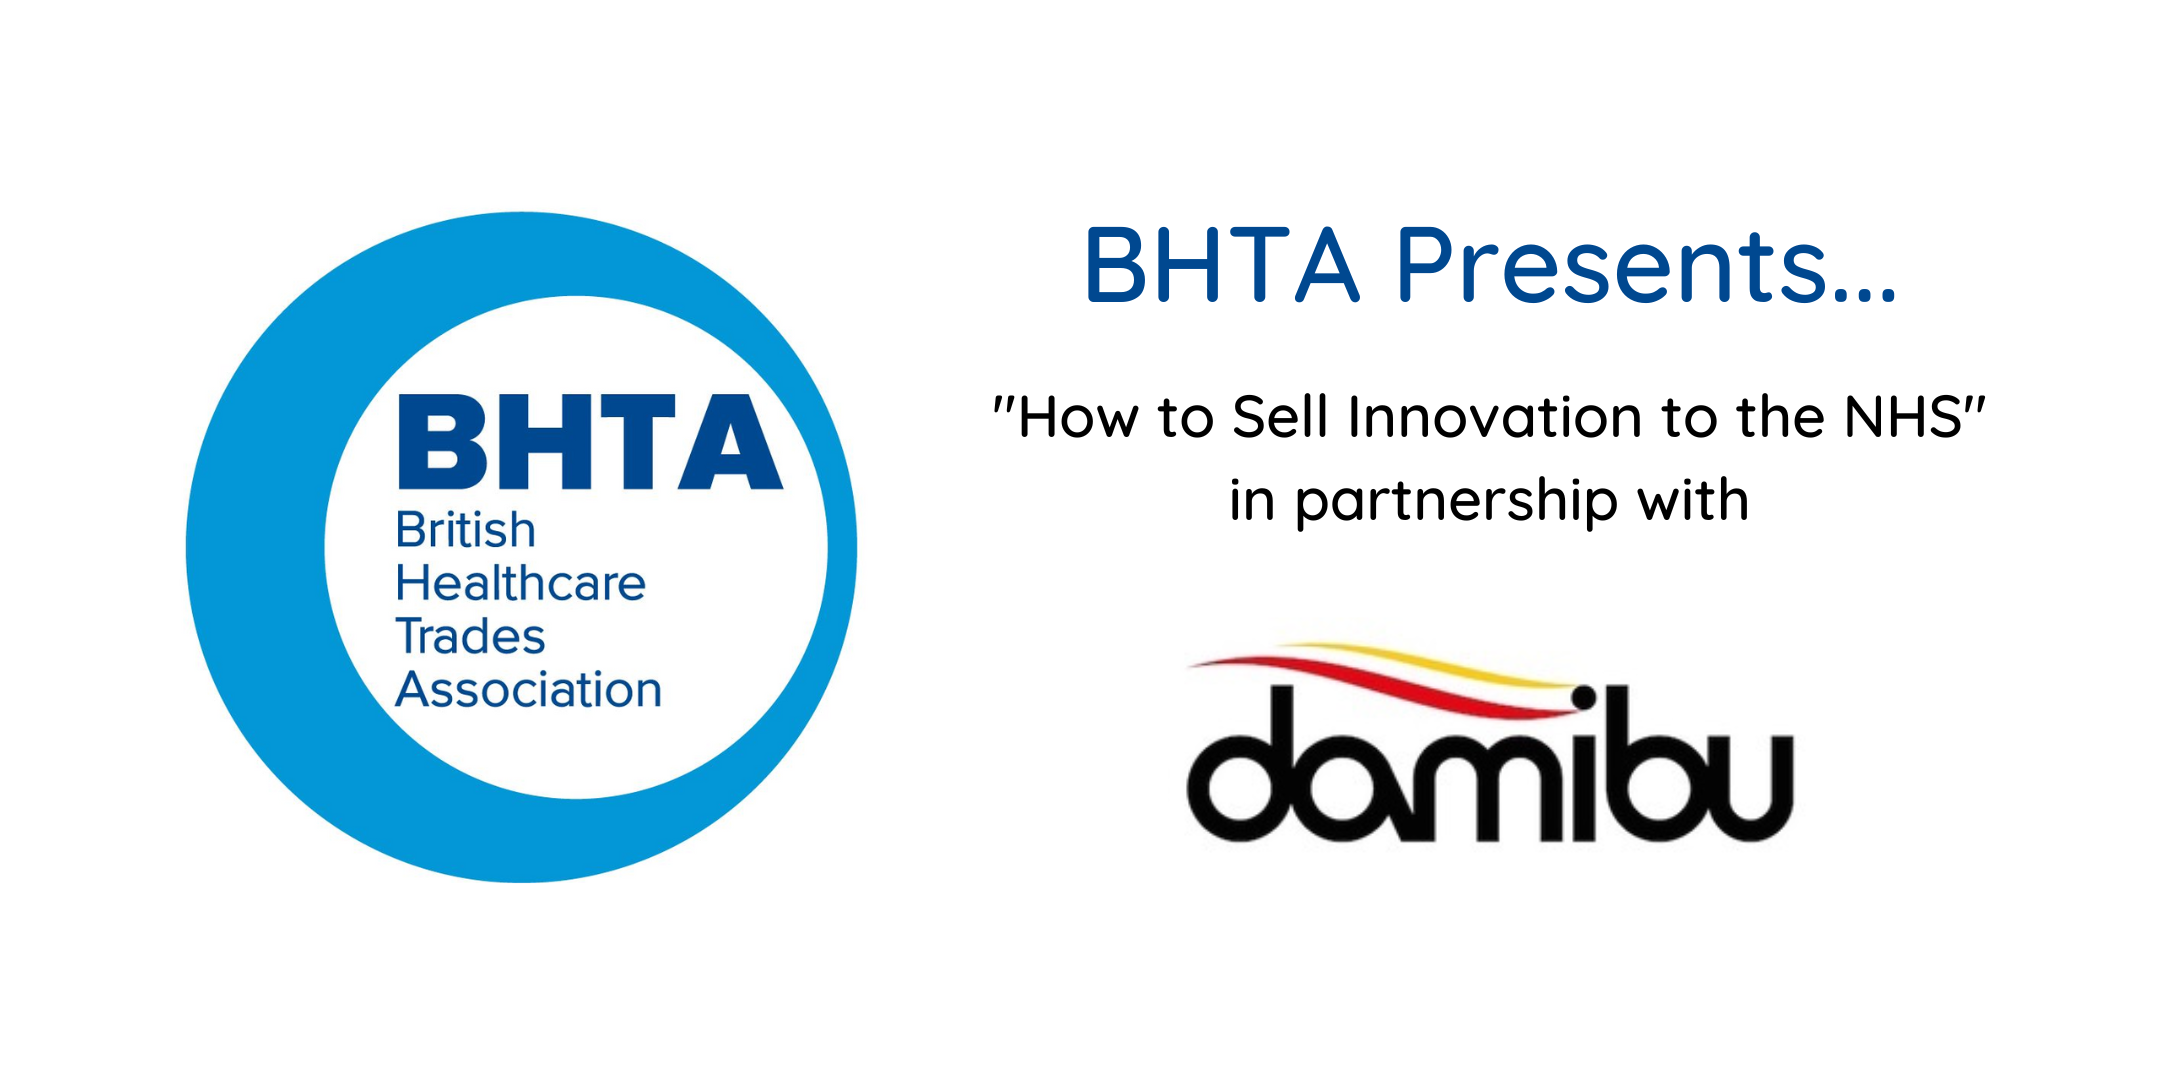 BHTA presents… “How to Sell Innovation to the NHS”